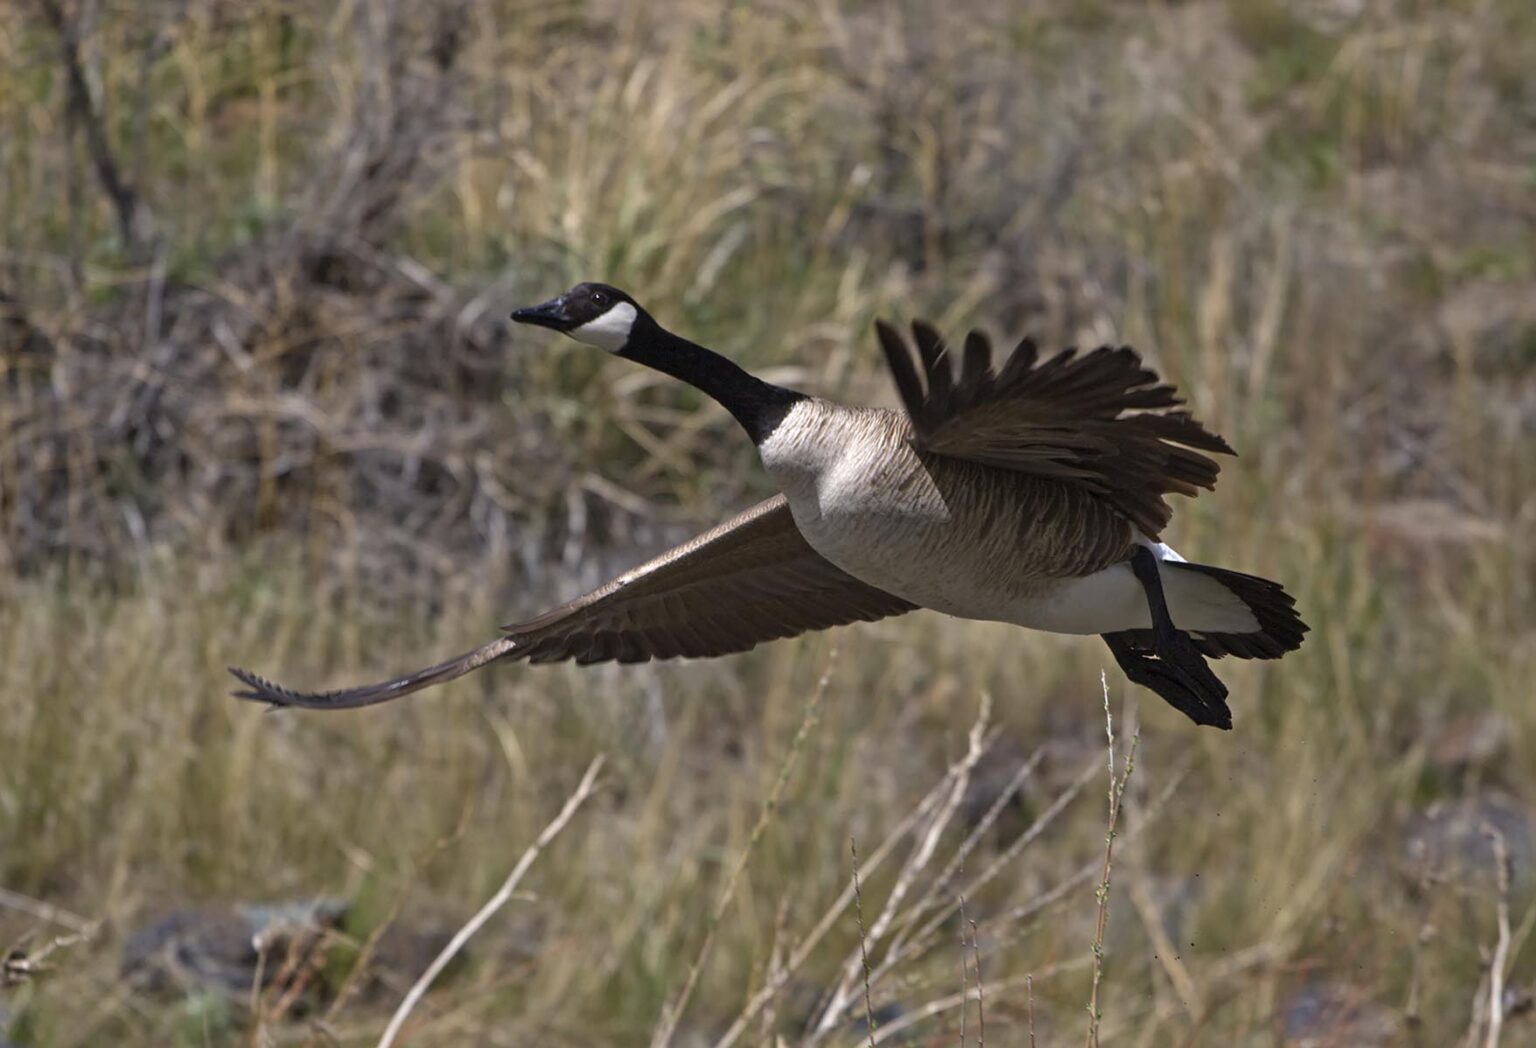 A CANADIAN GOOSE (Branta canadensi) flying along the wild and scenic OWYHEE RIVER - EASTERN, OREGON